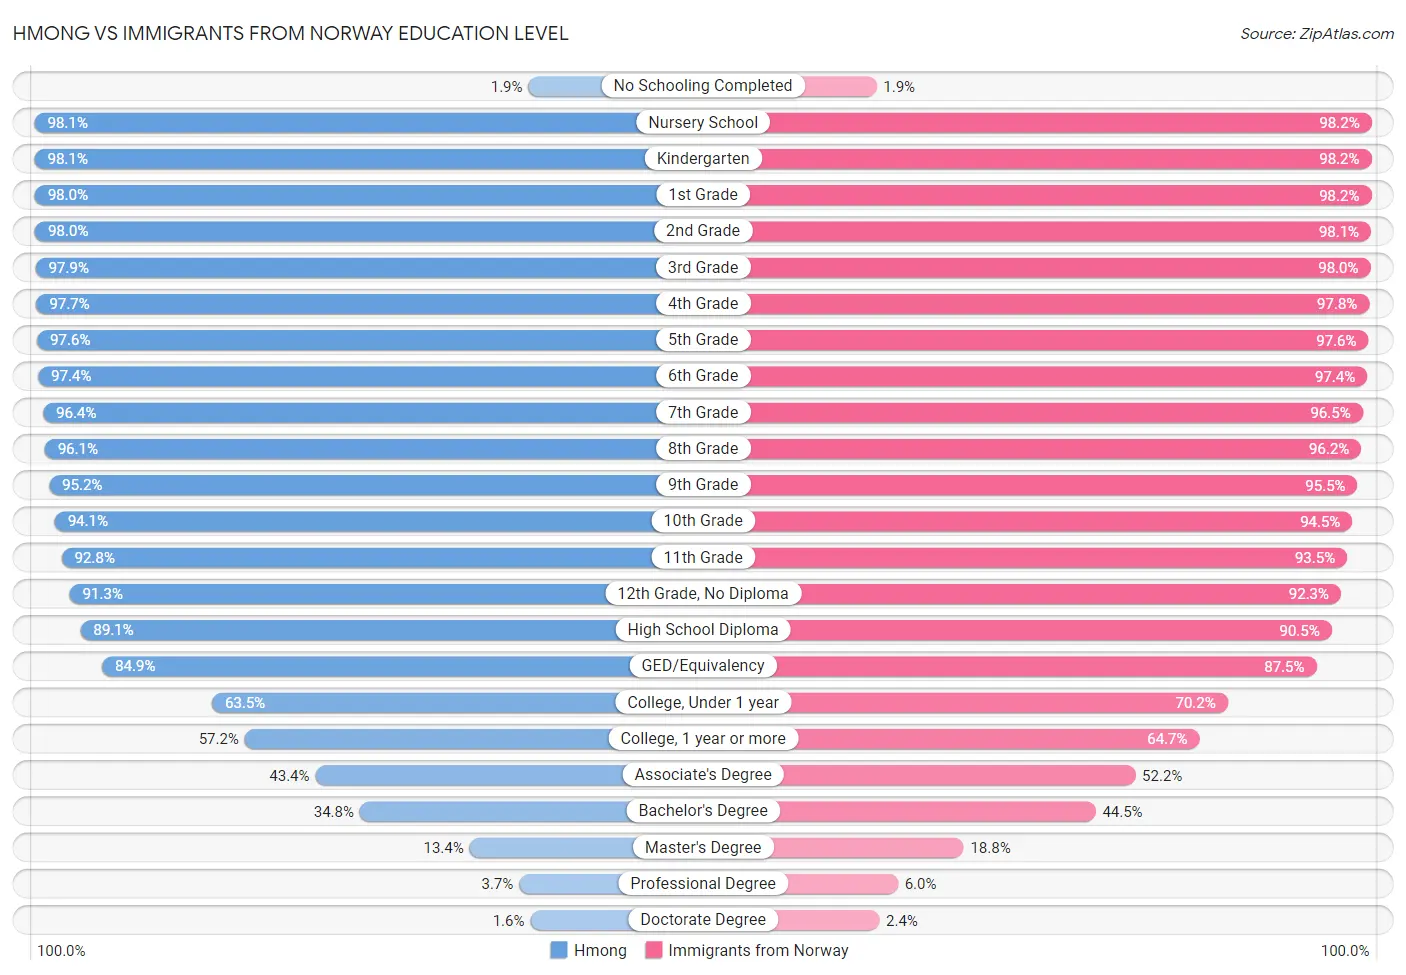 Hmong vs Immigrants from Norway Education Level